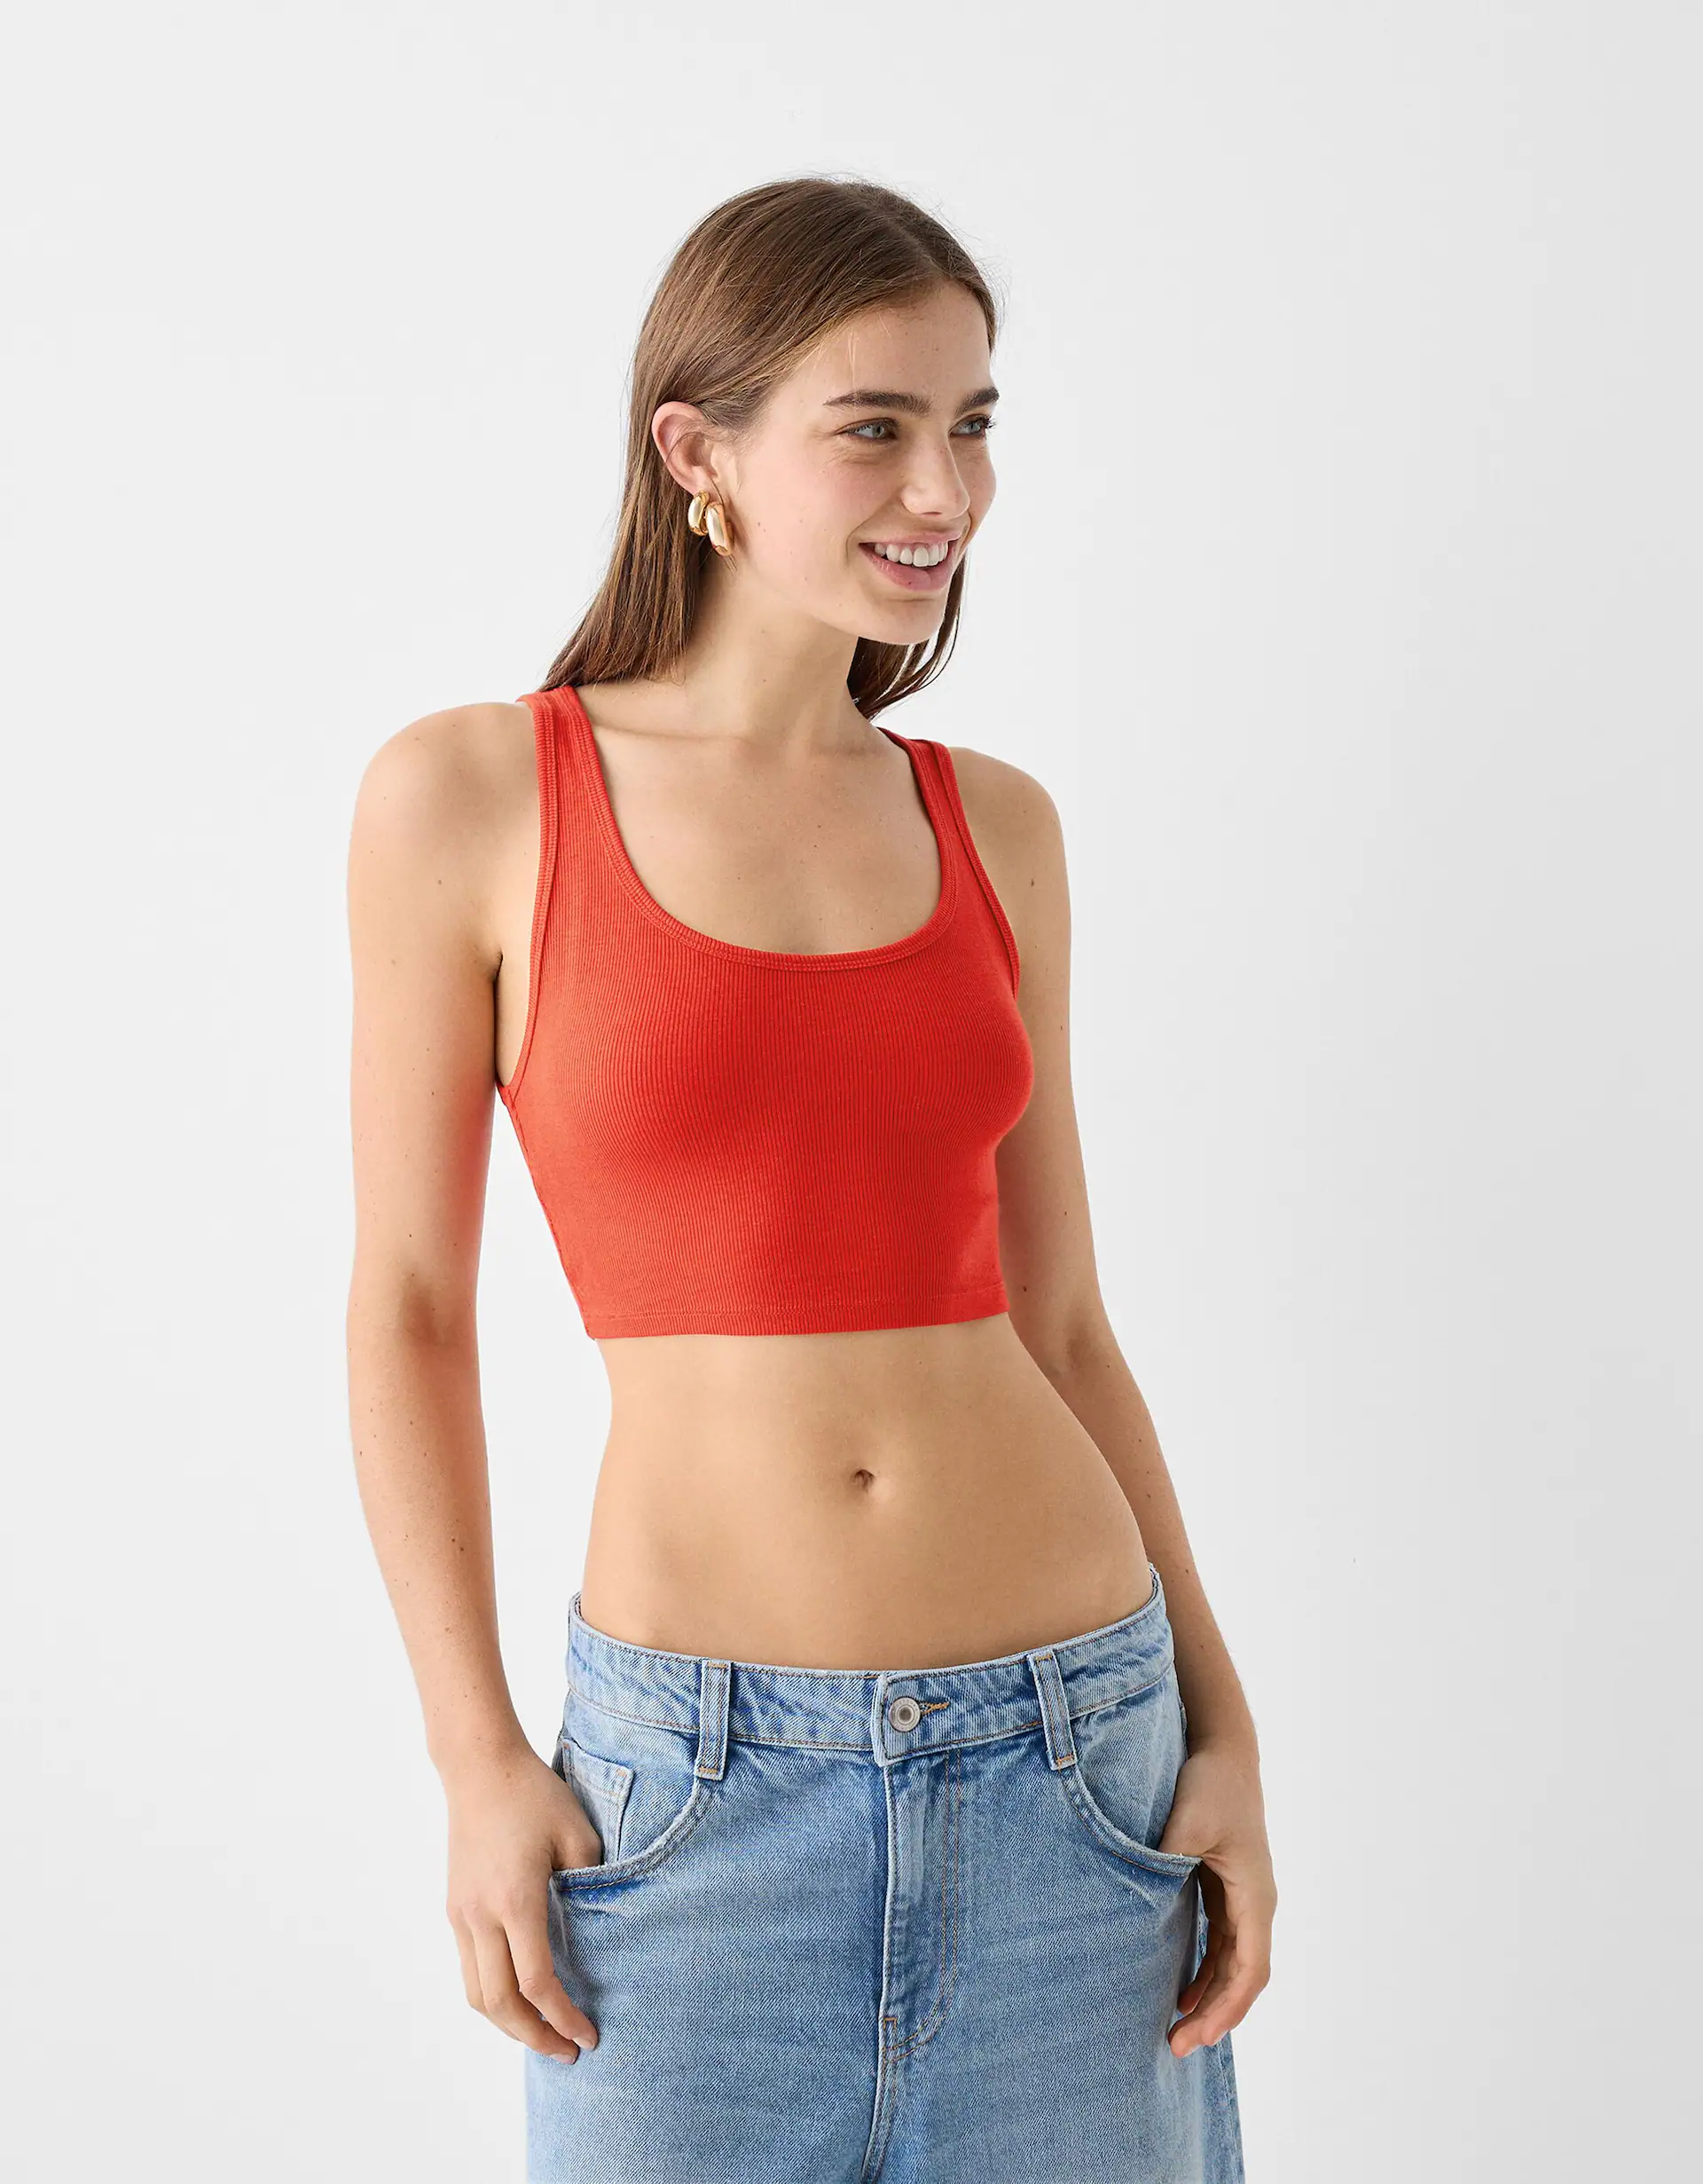 Gathered seamless strappy top - Tops - BSK Teen